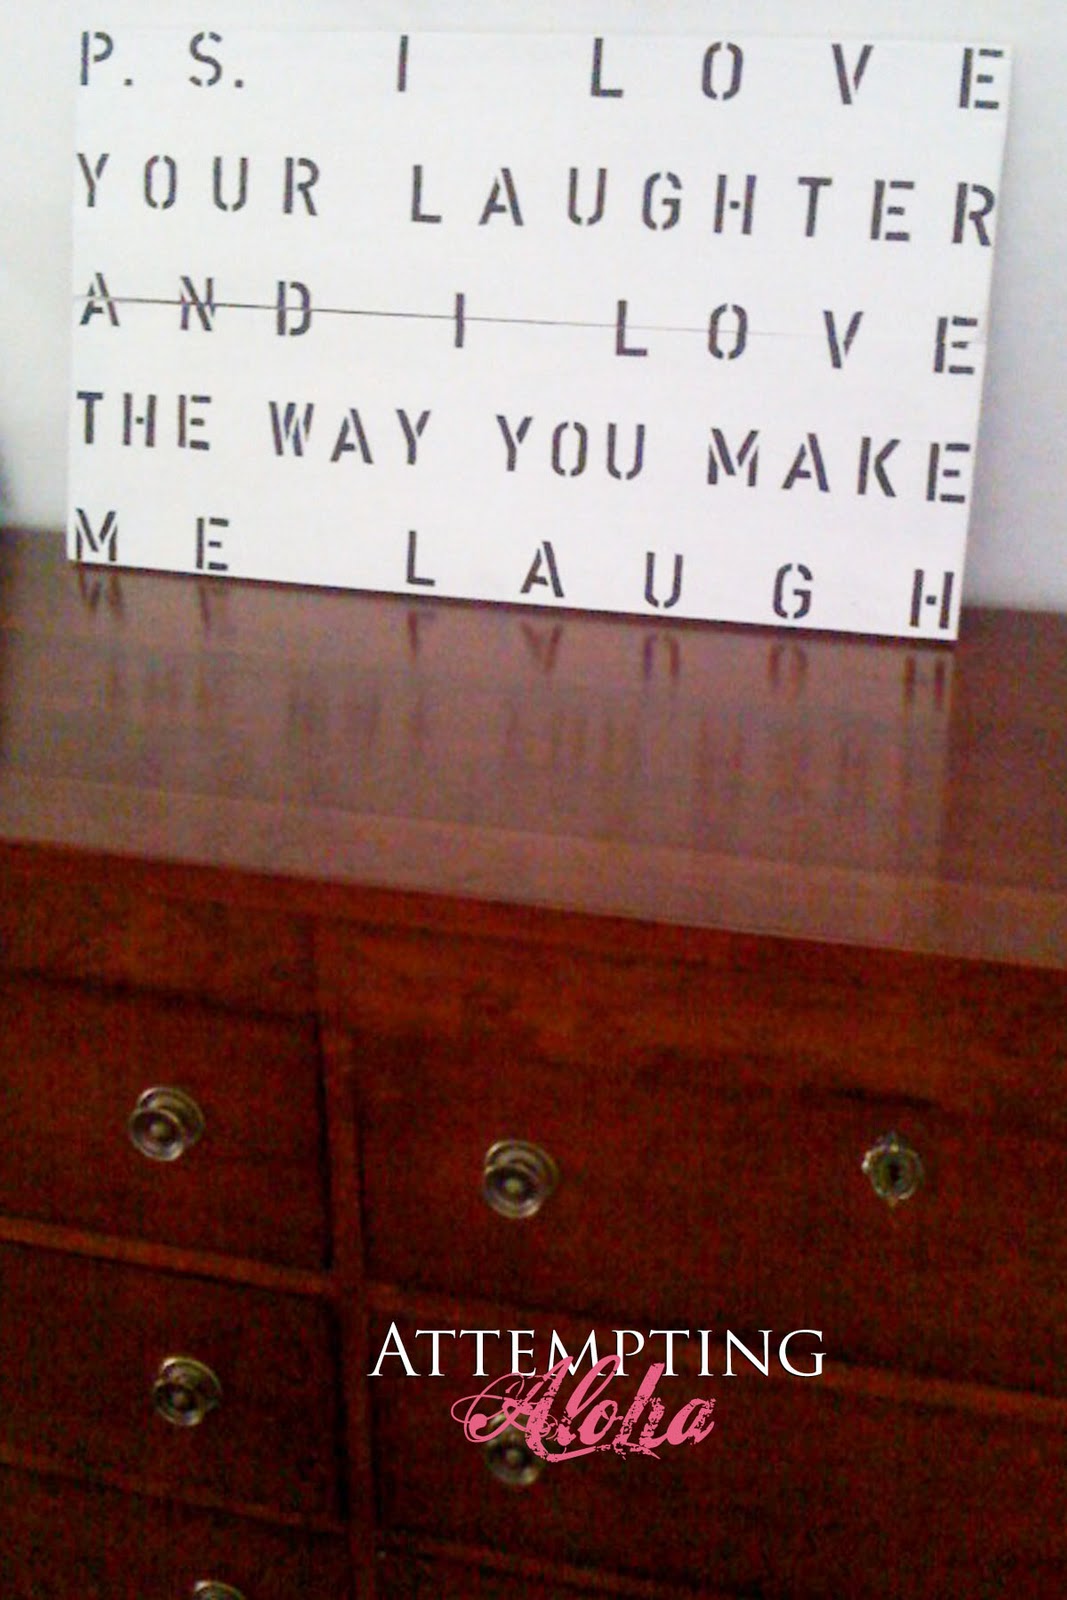 http://4.bp.blogspot.com/_7GDWF1D9h2o/TUtnedCgD1I/AAAAAAAAAfo/HYAdg0suslM/s1600/PS+I+Love+your+laughter+sign+BB.jpg